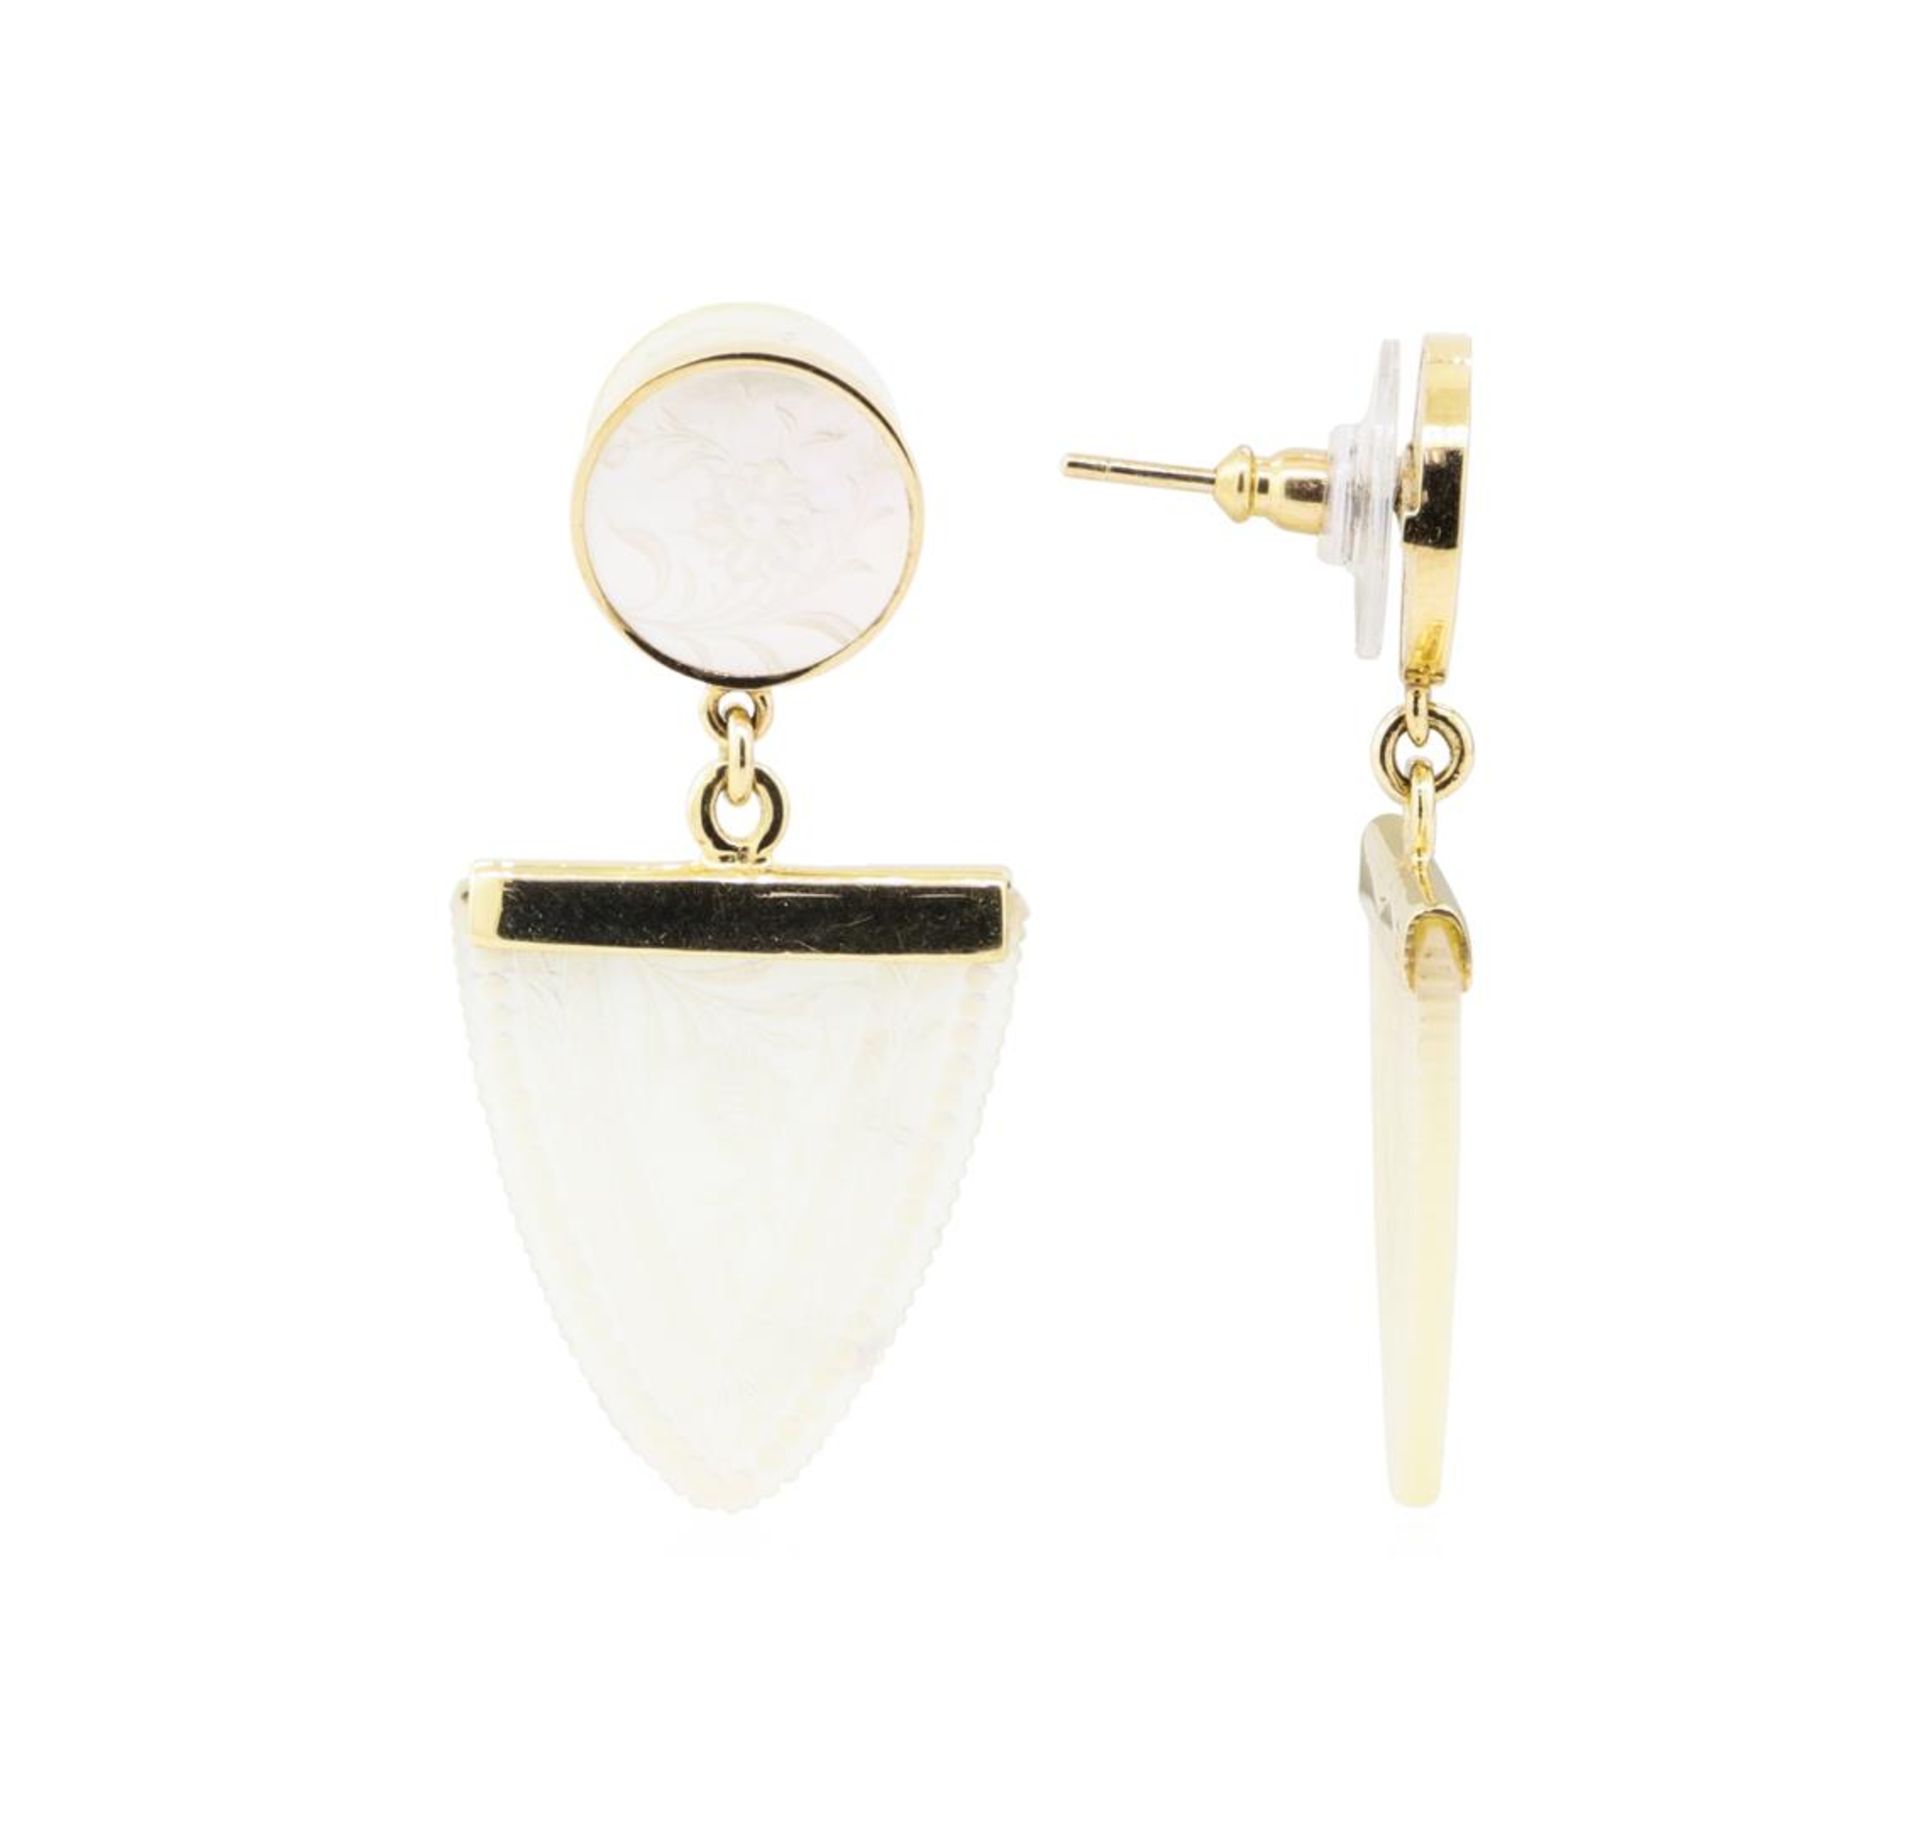 Hand-Engraved Mother of Pearl Dangle Earrings - 14KT Yellow Gold - Image 2 of 2